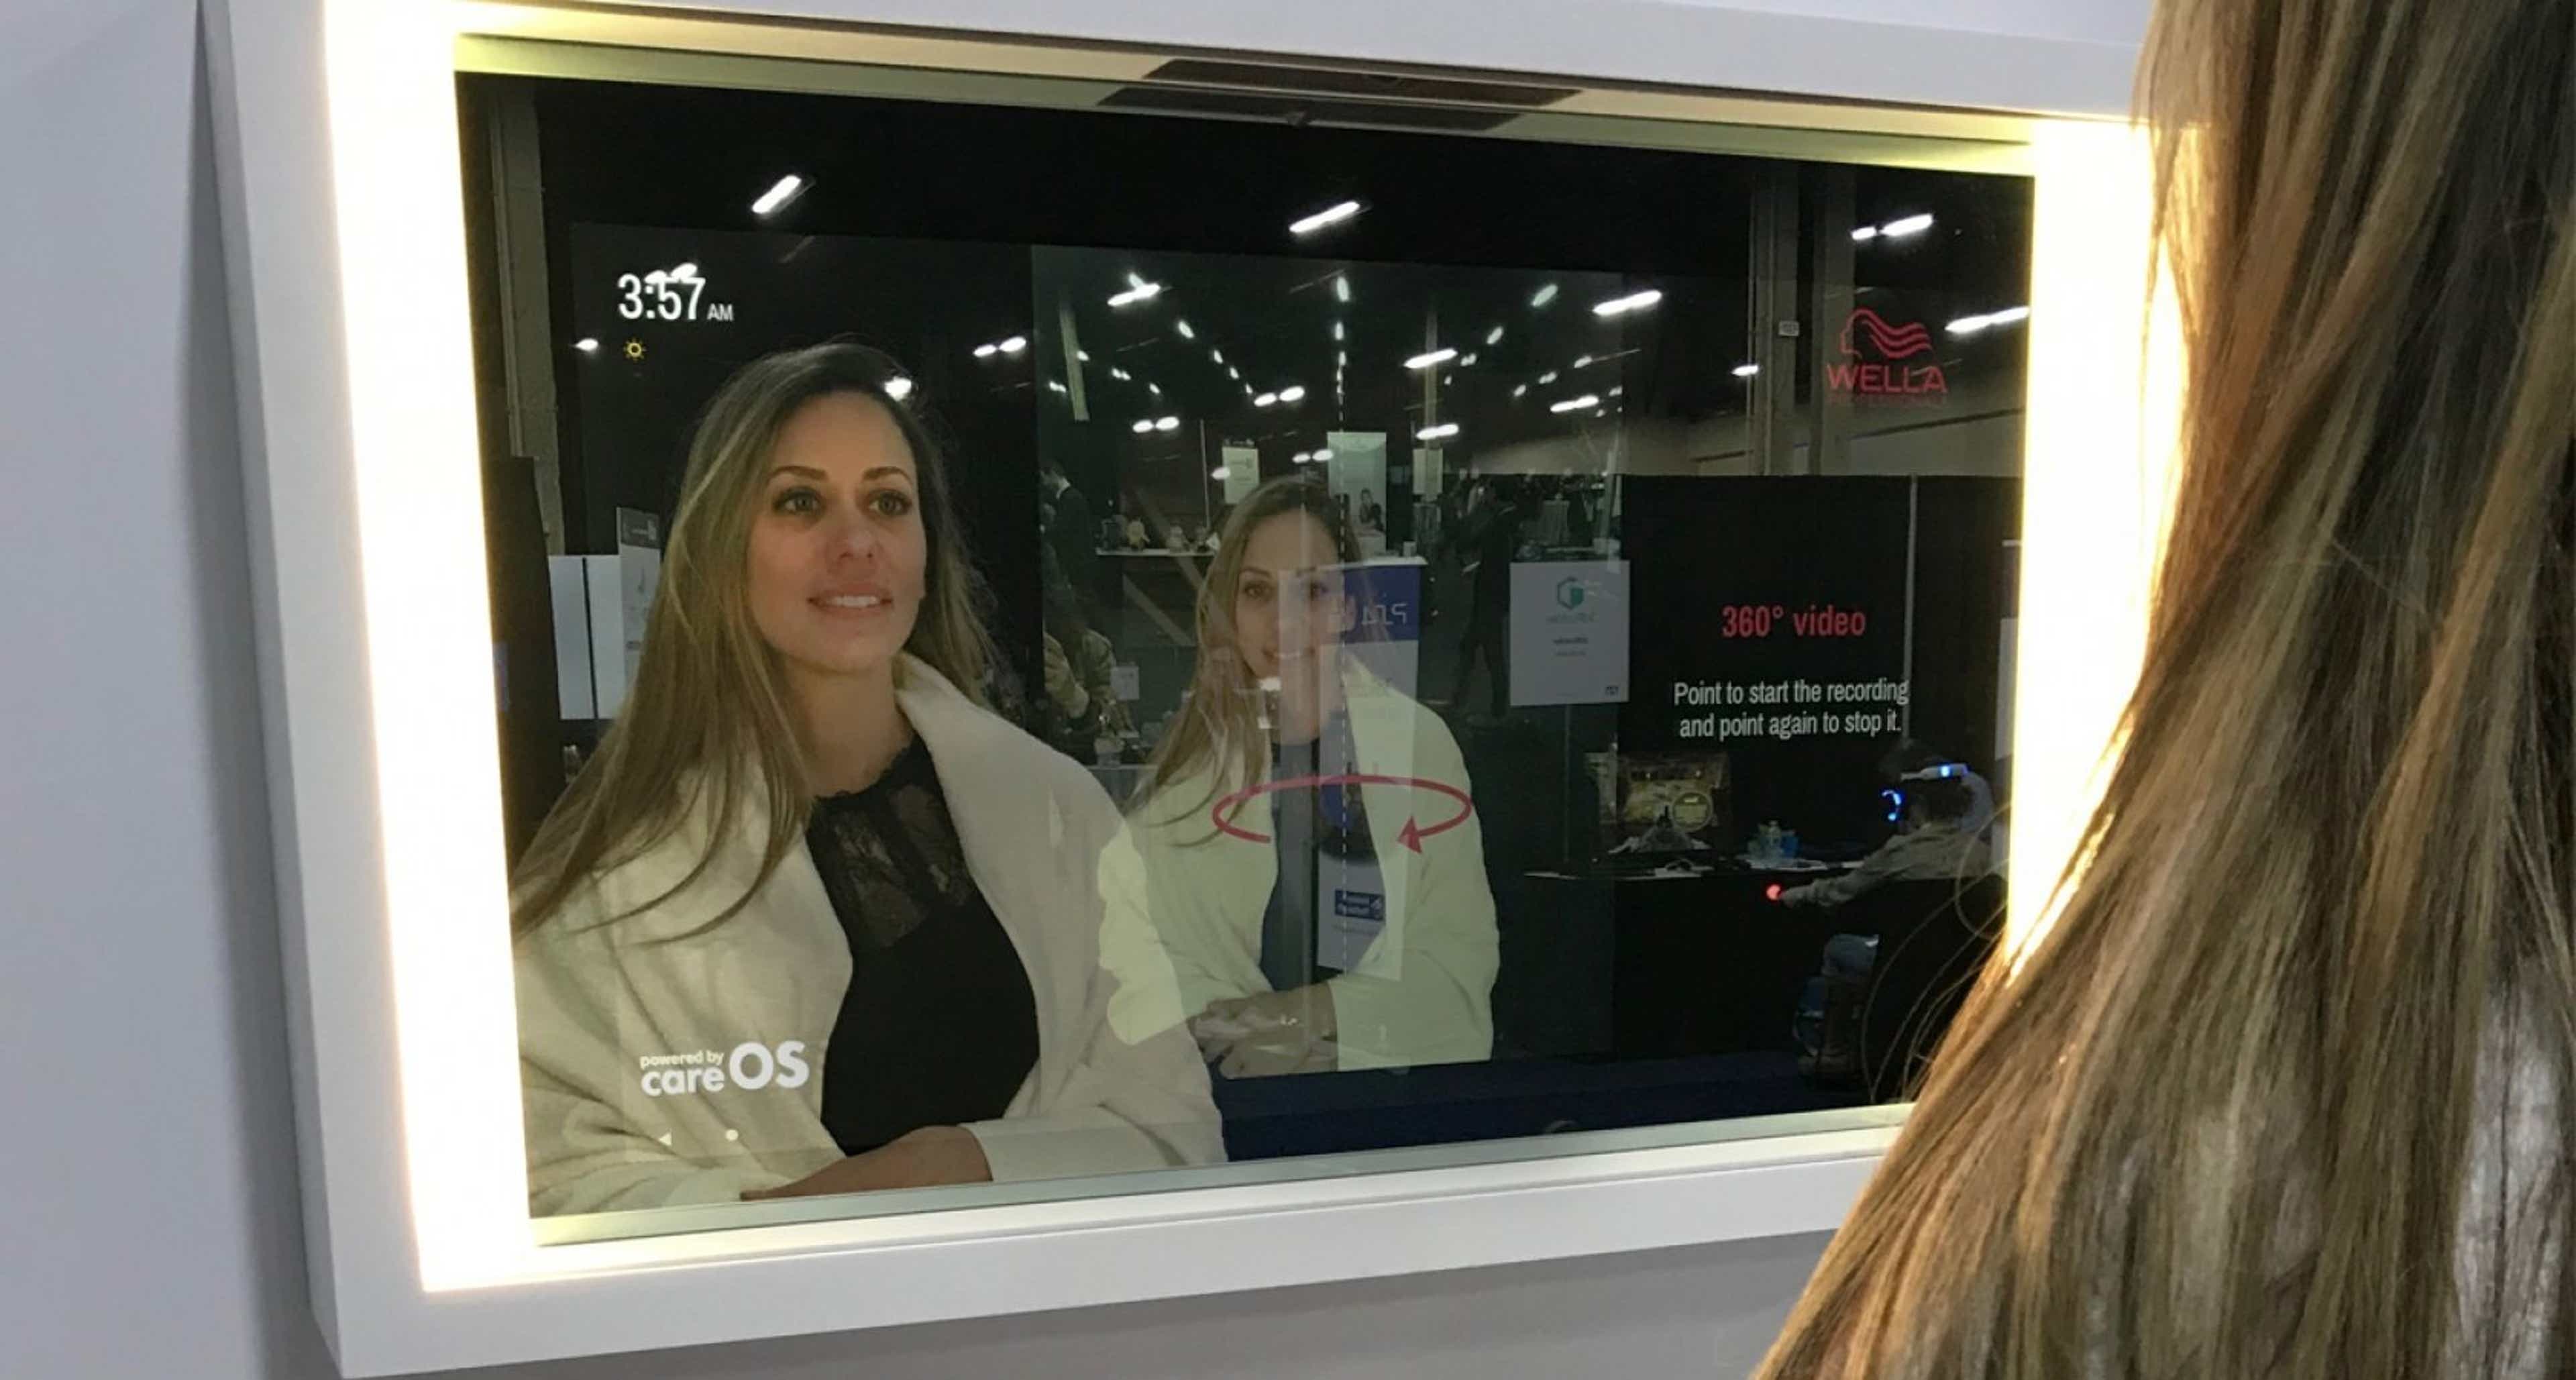 Coty unveils Wella Professionals AR enabled smart mirror for hair salon at CES 2019